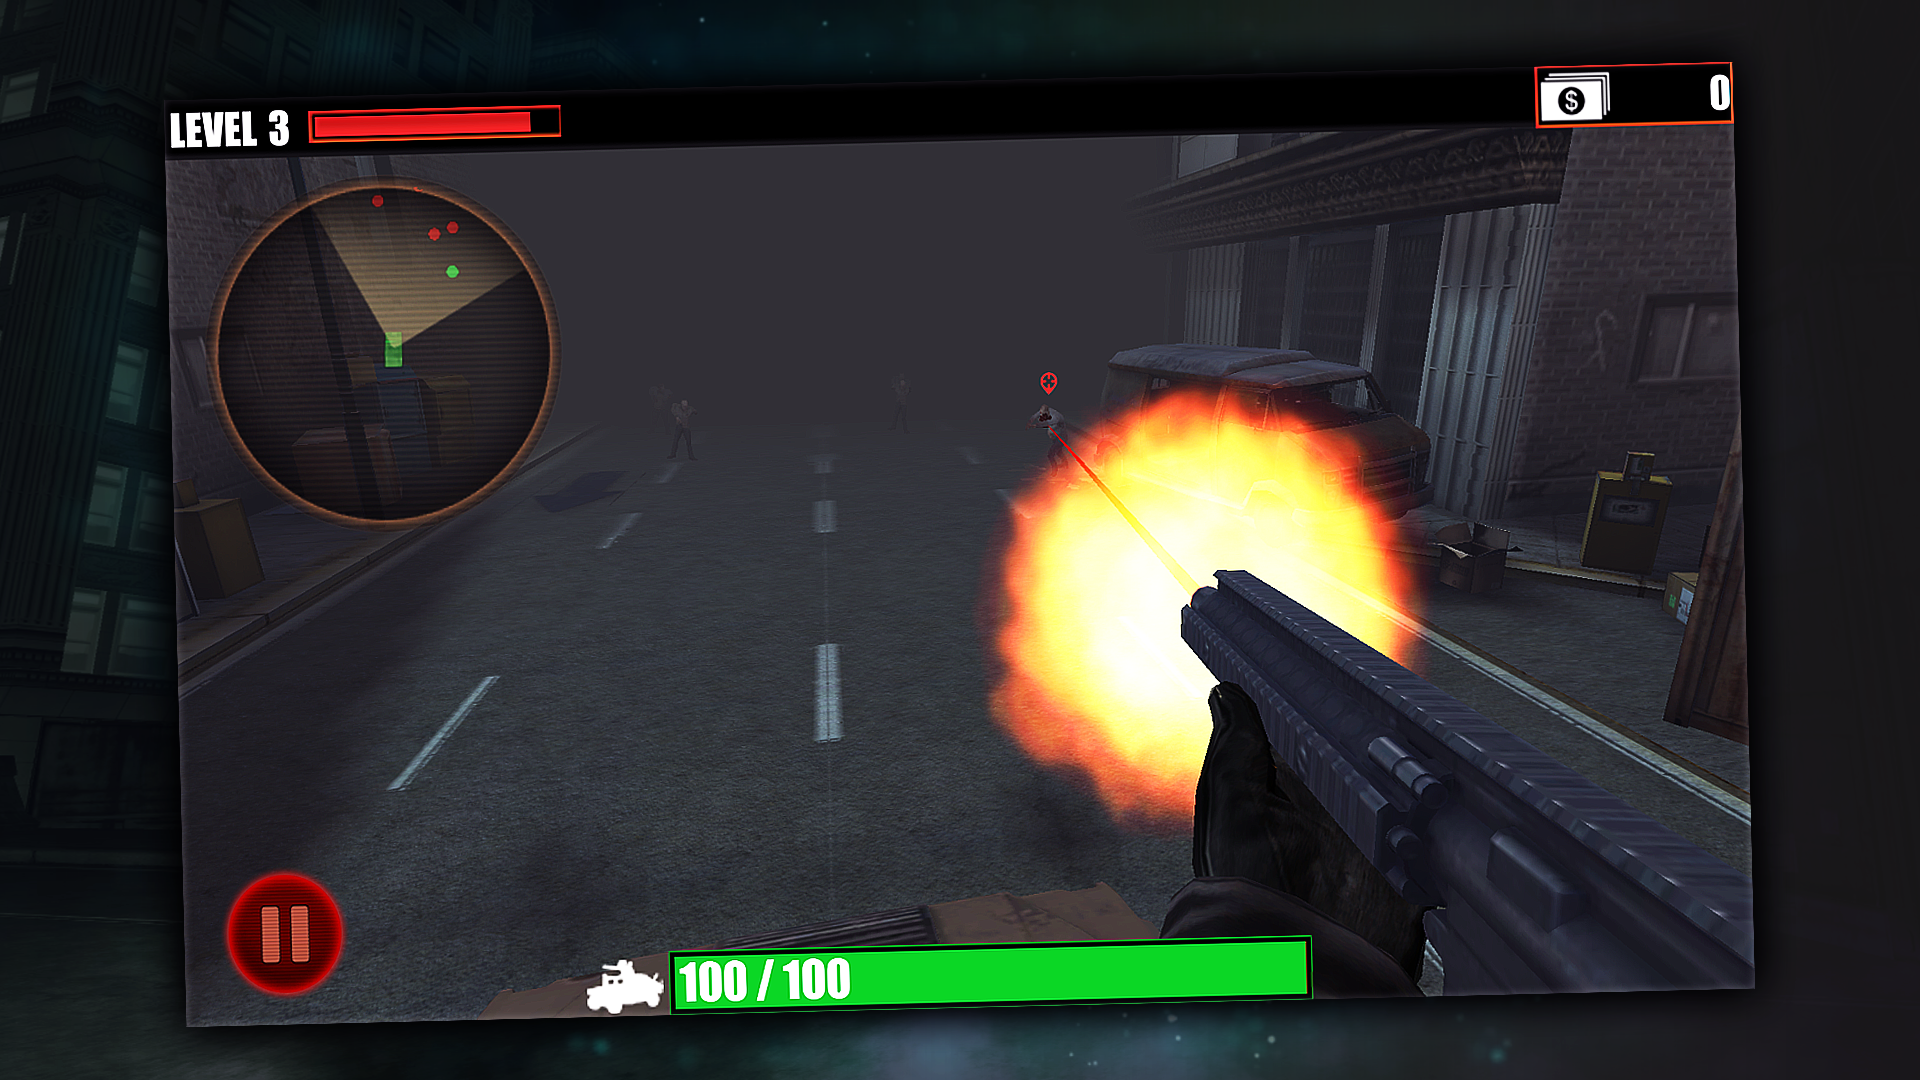 Screenshot 1 of VR Zombies: The Zombie Shooter Games (Cardboard) 1.0.6